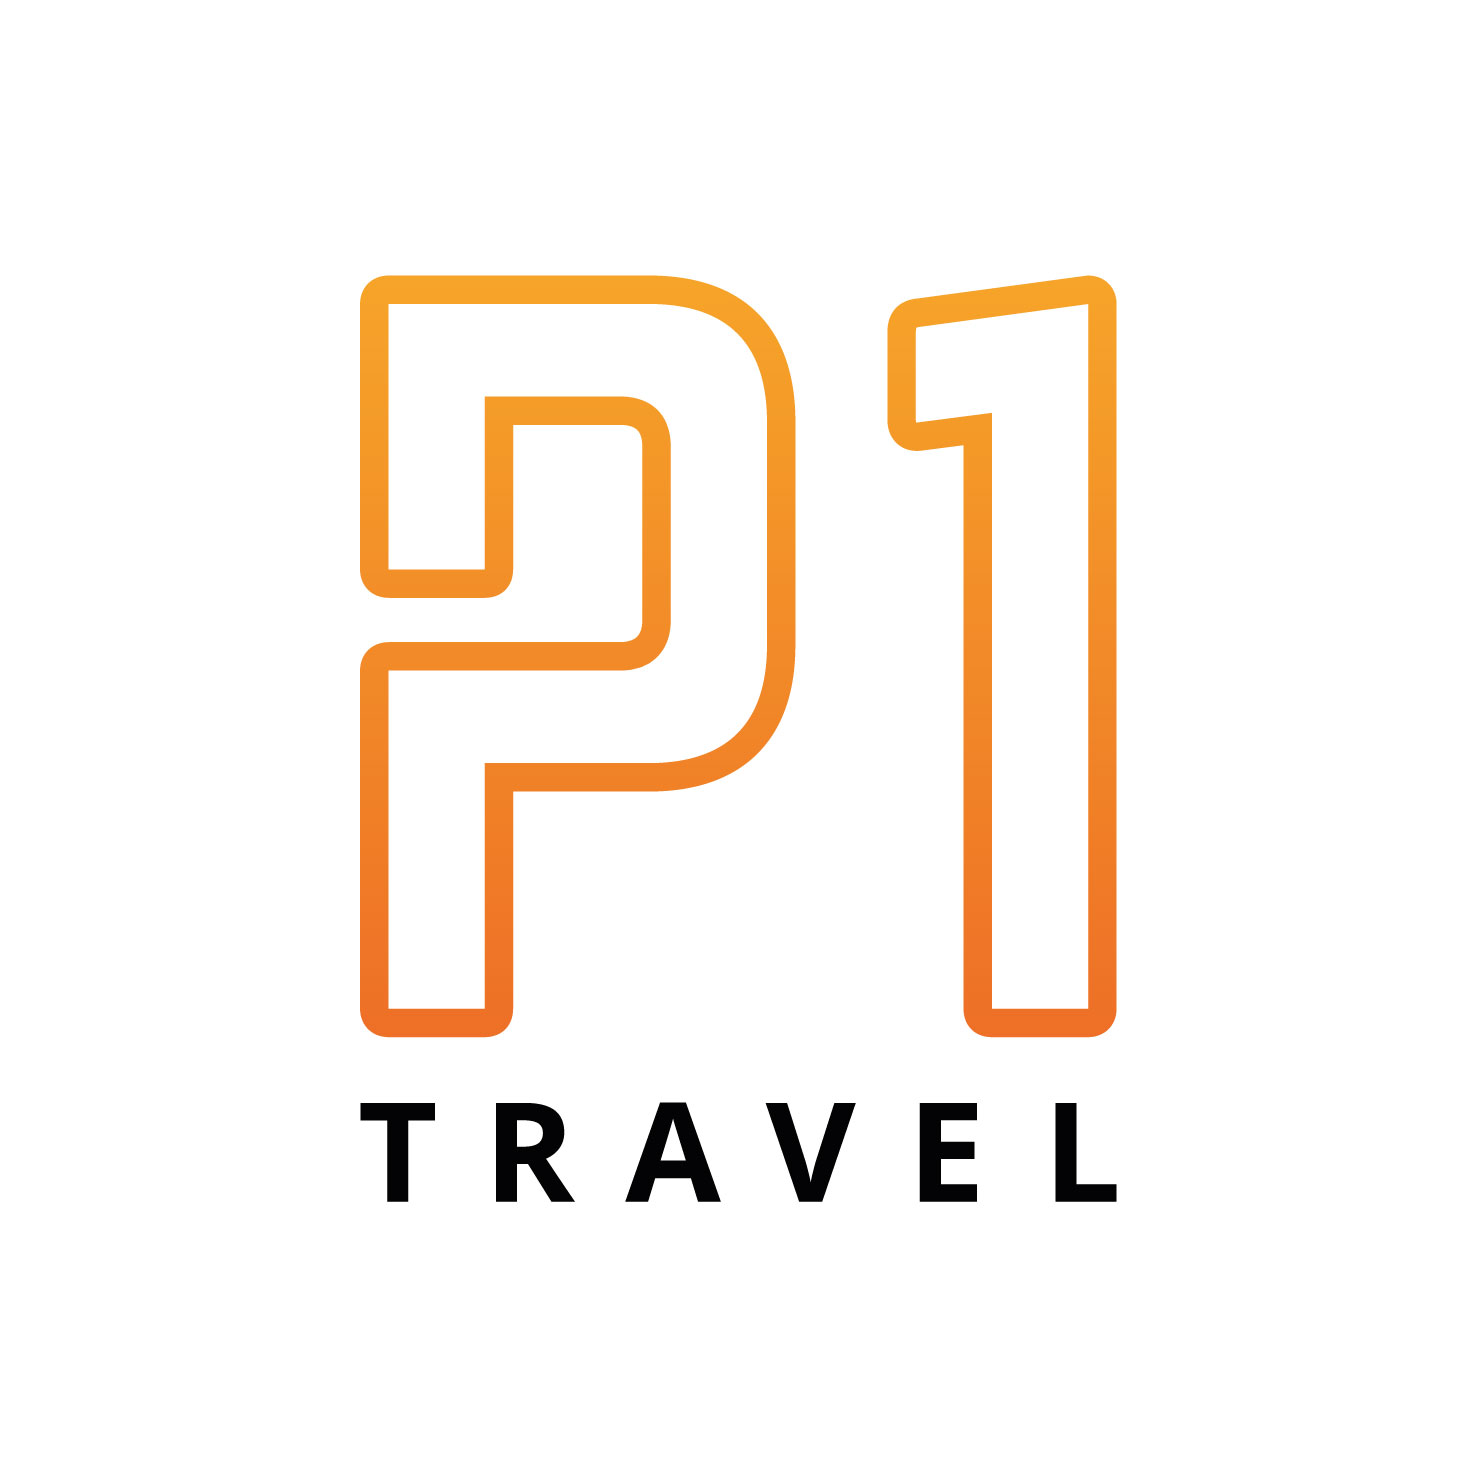 p1 travel booking conditions